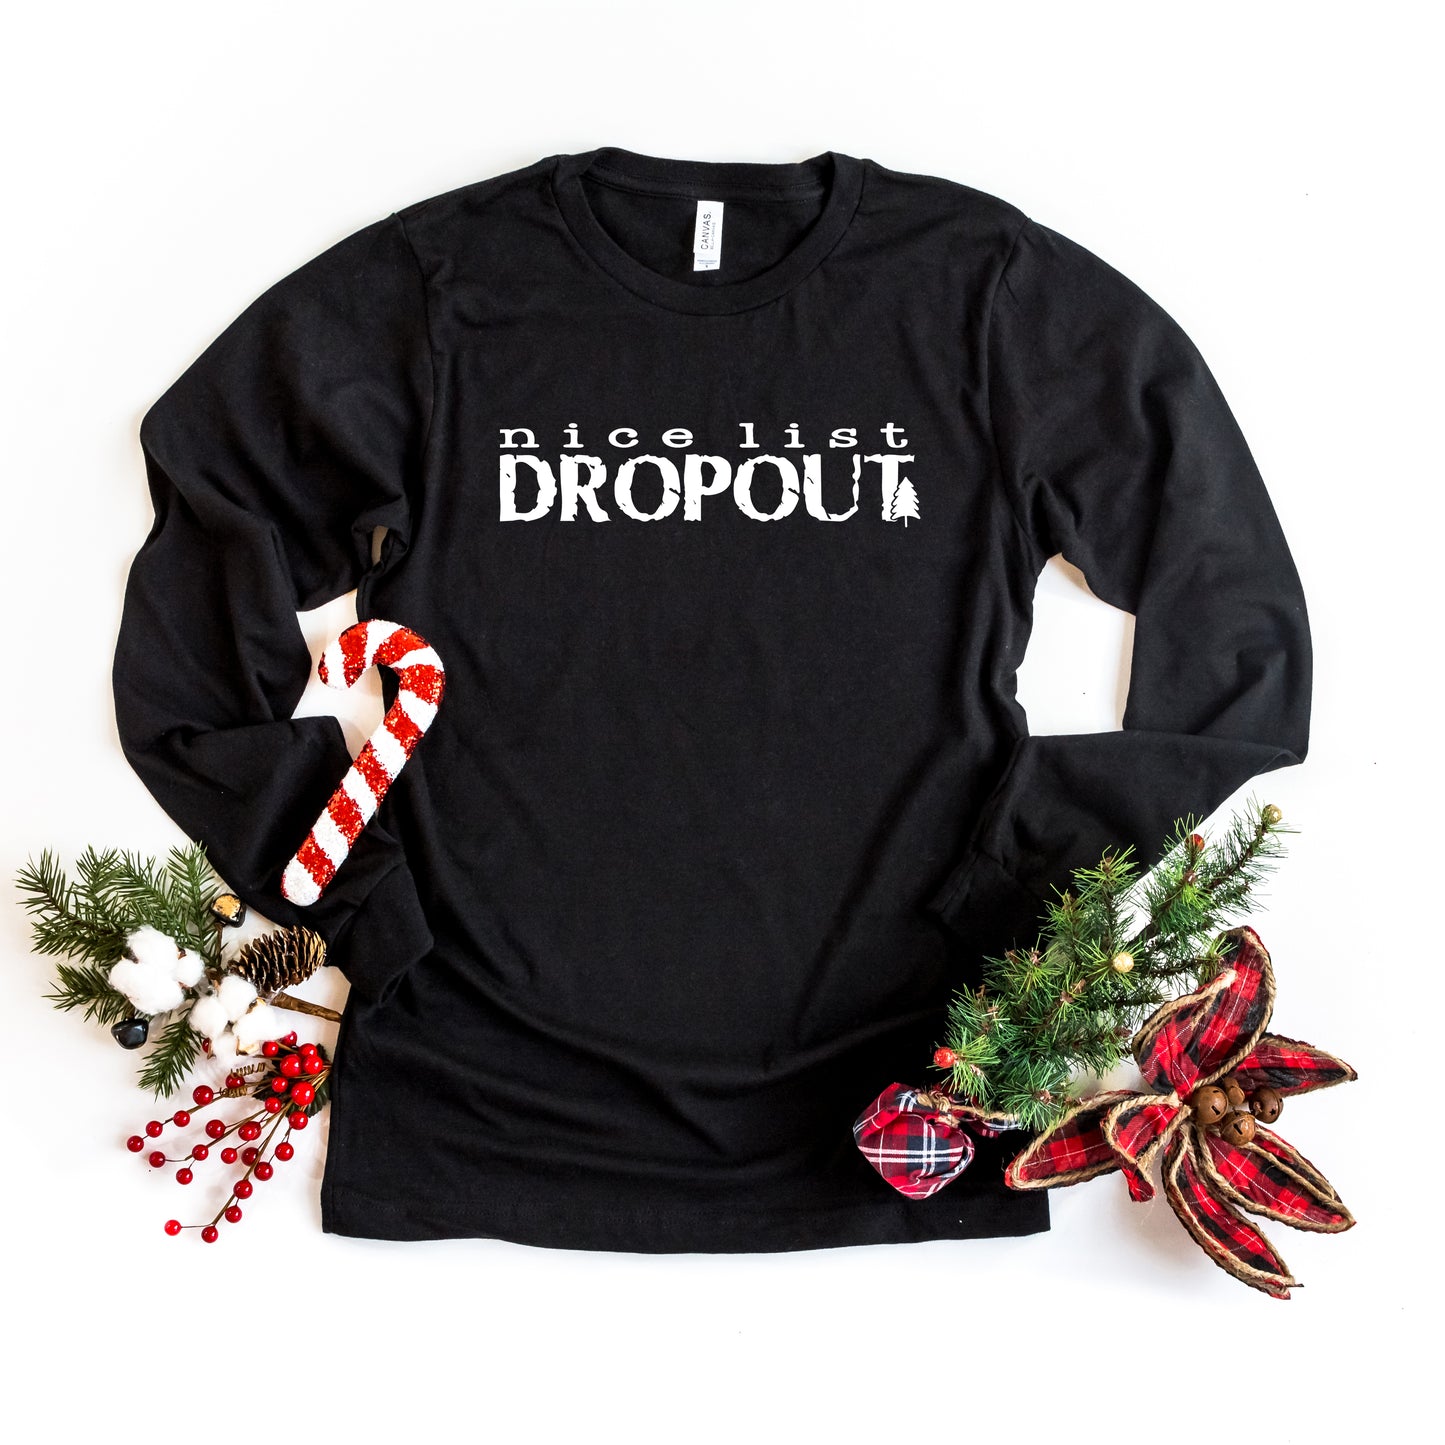 Nice List Dropout | Long Sleeve Graphic Tee